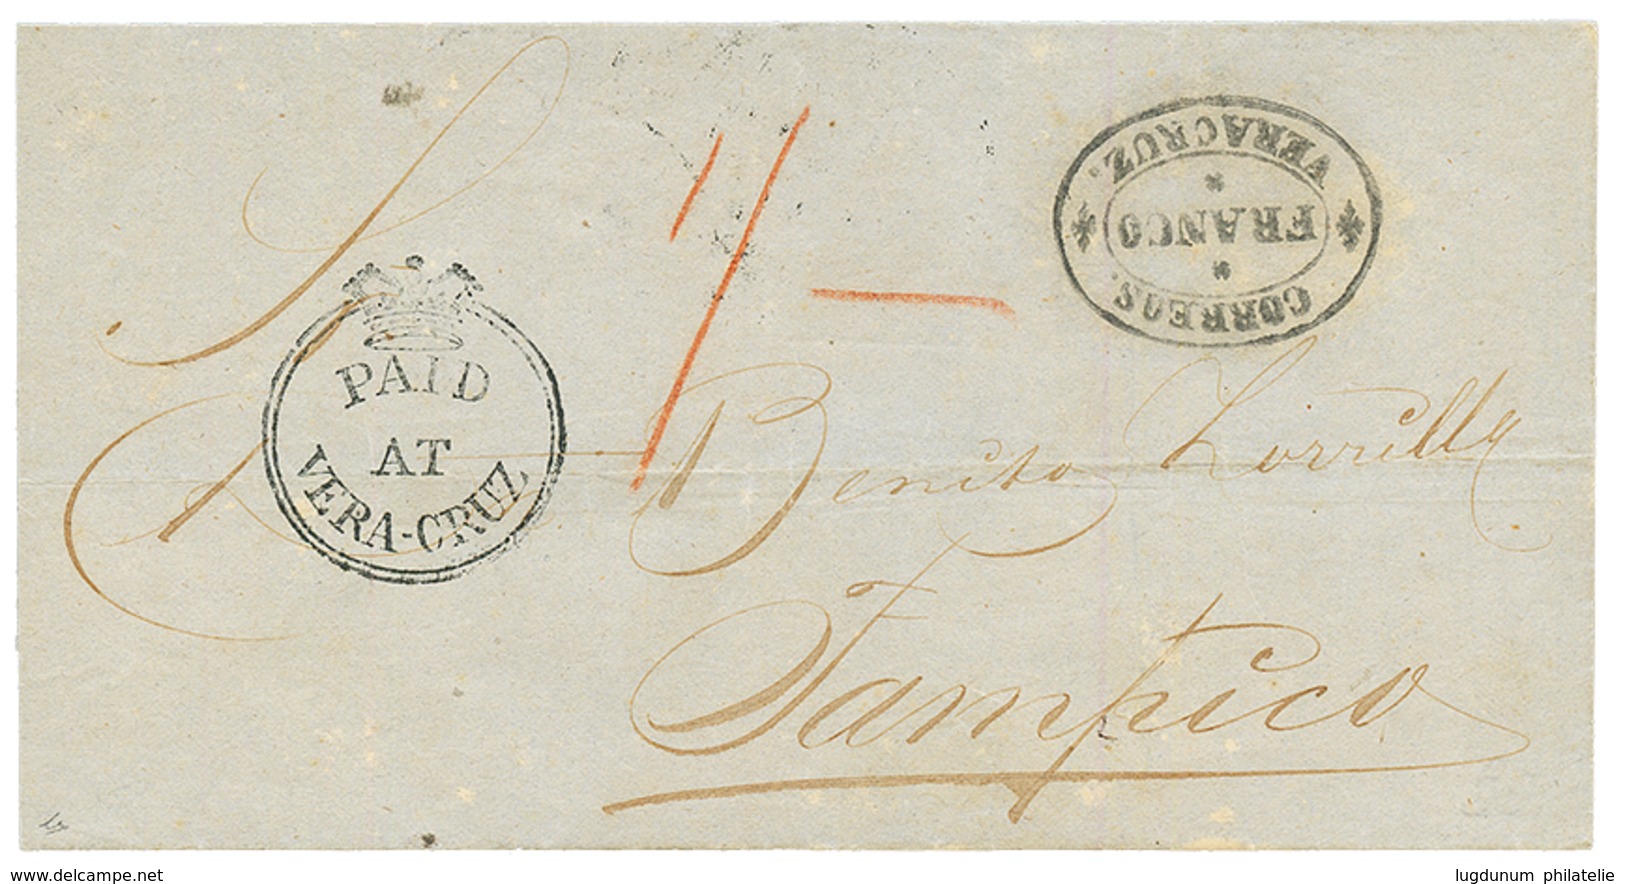 1862 PAID AT VERA-CRUZ + "1/-" Tax Marking On Cover To TAMPICO (MEXICO). Superb. - Mexique